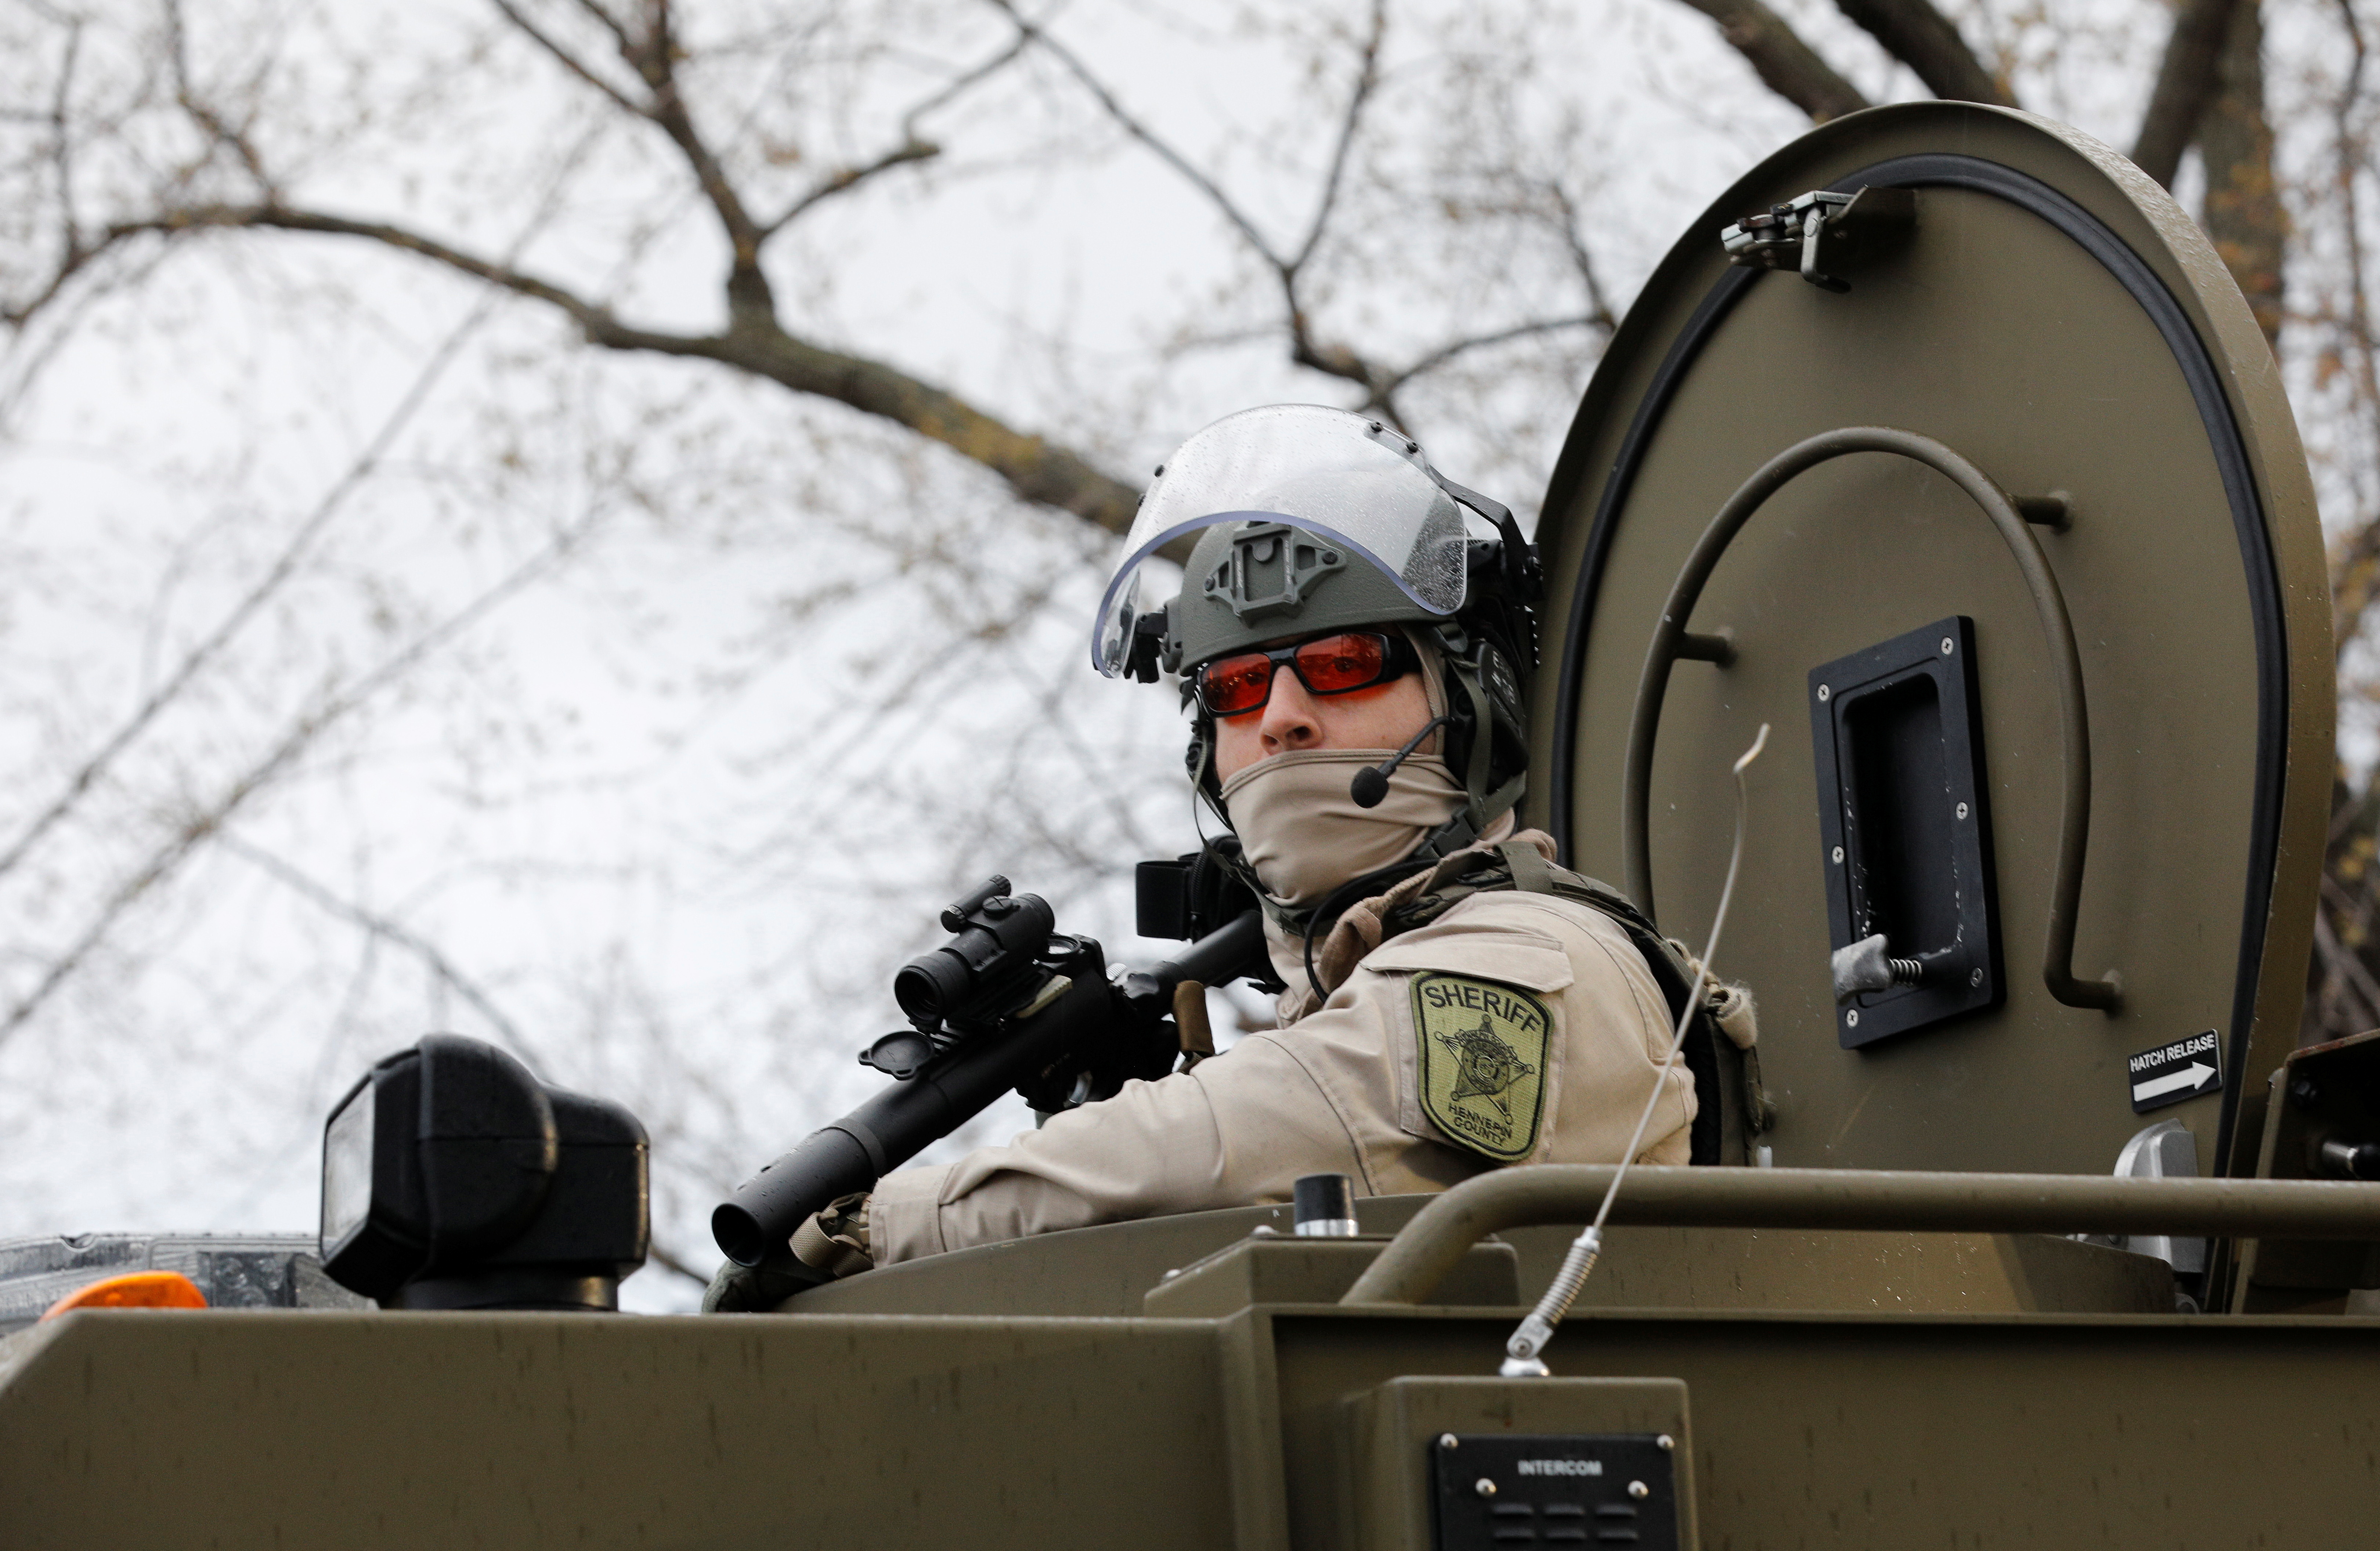 A sheriff's deputy is seen inside an armored vehicle in the fenced up perimeter of the Brooklyn Center Police Department, days after former police officer Kim Potter fatally shot Daunte Wright, in Brooklyn Center, Minnesota, U.S. April 14, 2021. REUTERS/Nick Pfosi